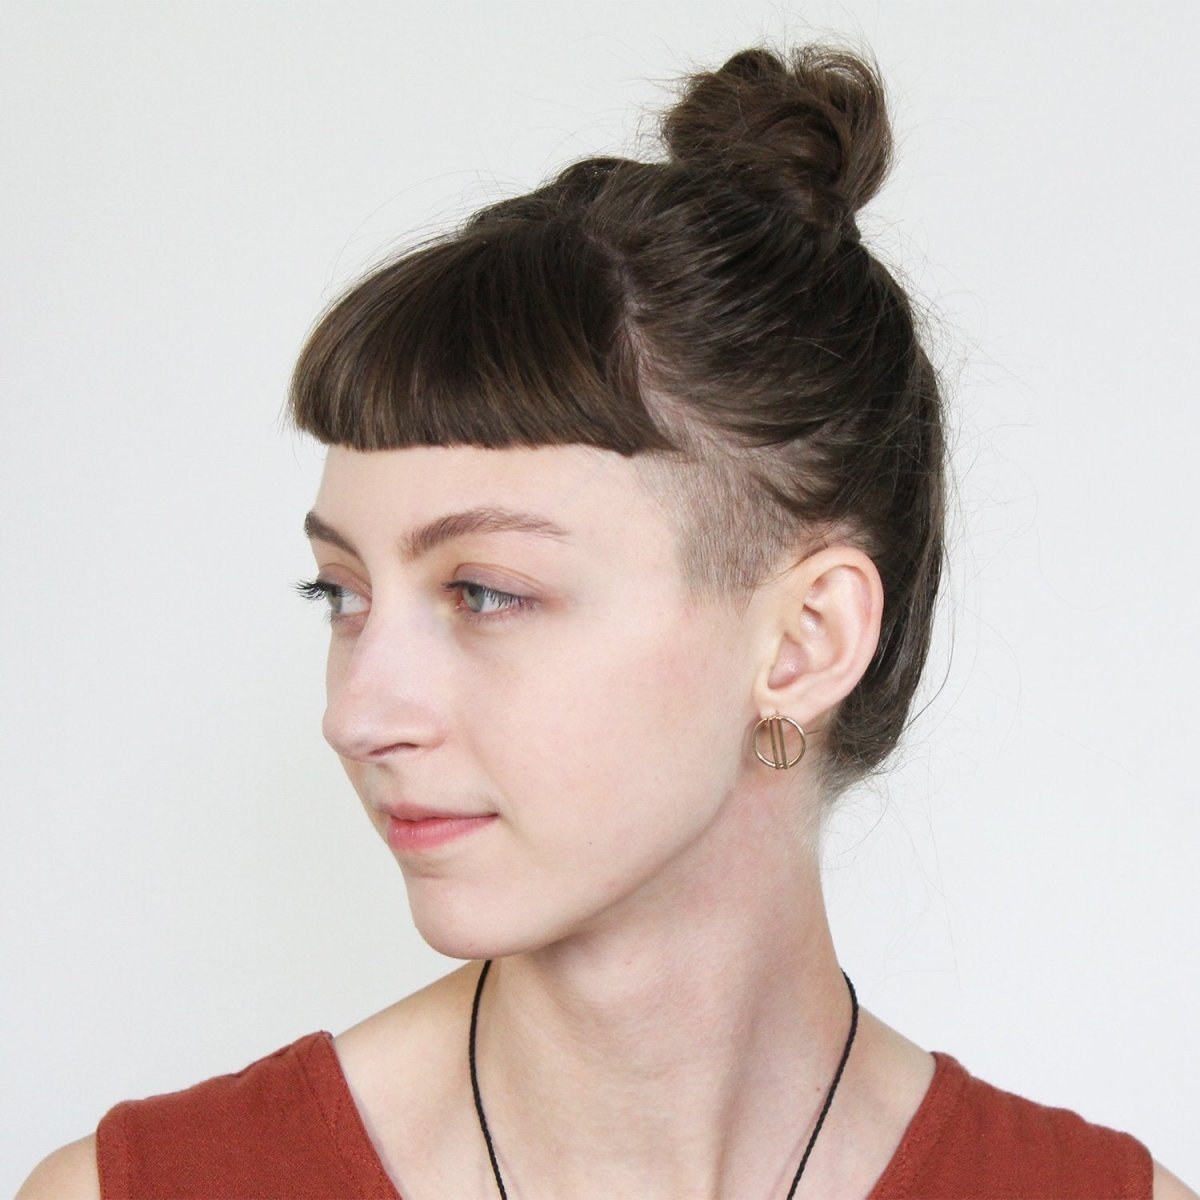 Betsy & iya bronze Liv stud earrings, pictured on the profile of a model with bangs and a topknot.